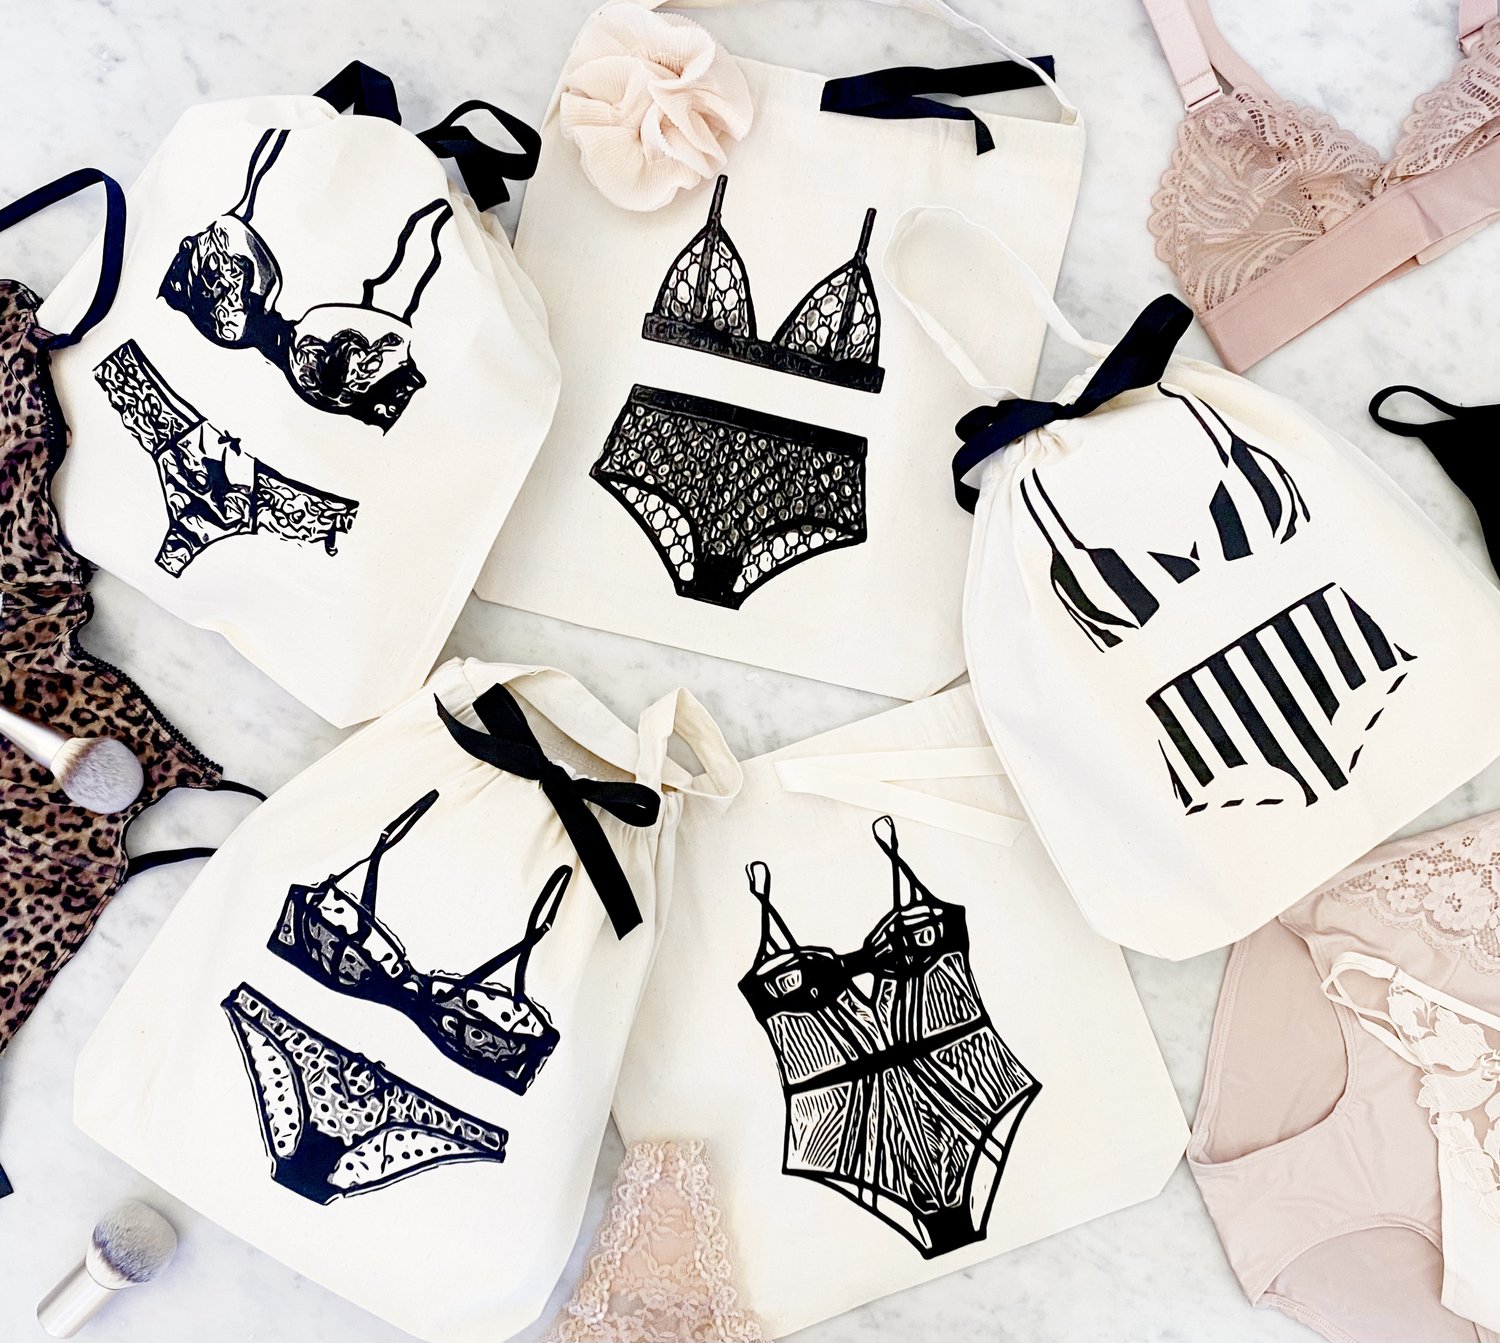 How To : Laundry Your Lingerie in 6 Easy Steps — Bag-all Journal